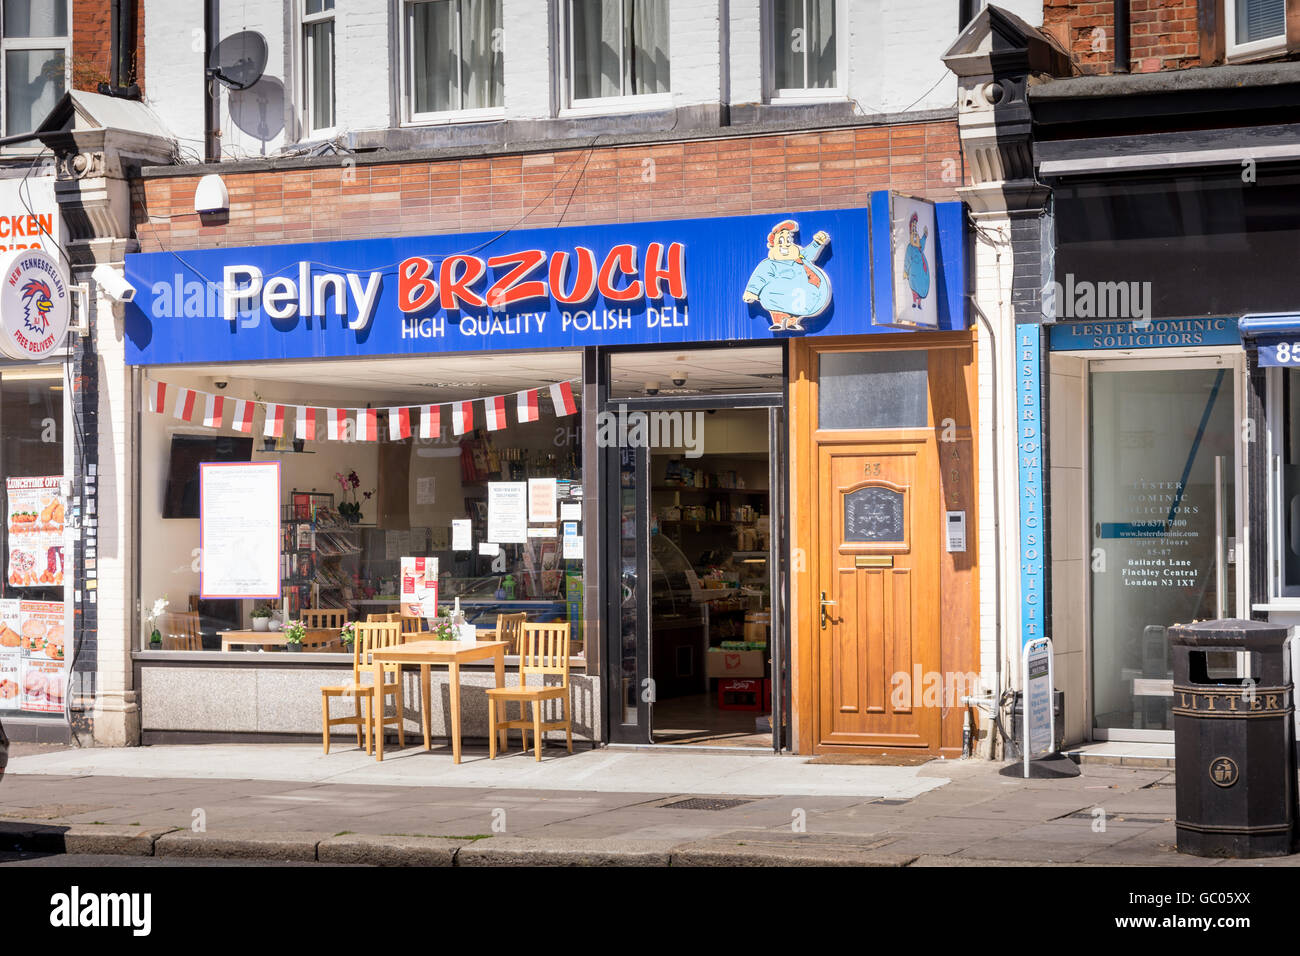 Front view of Polish Grocery Store/Delicatessen in British high street. London suburbs Stock Photo